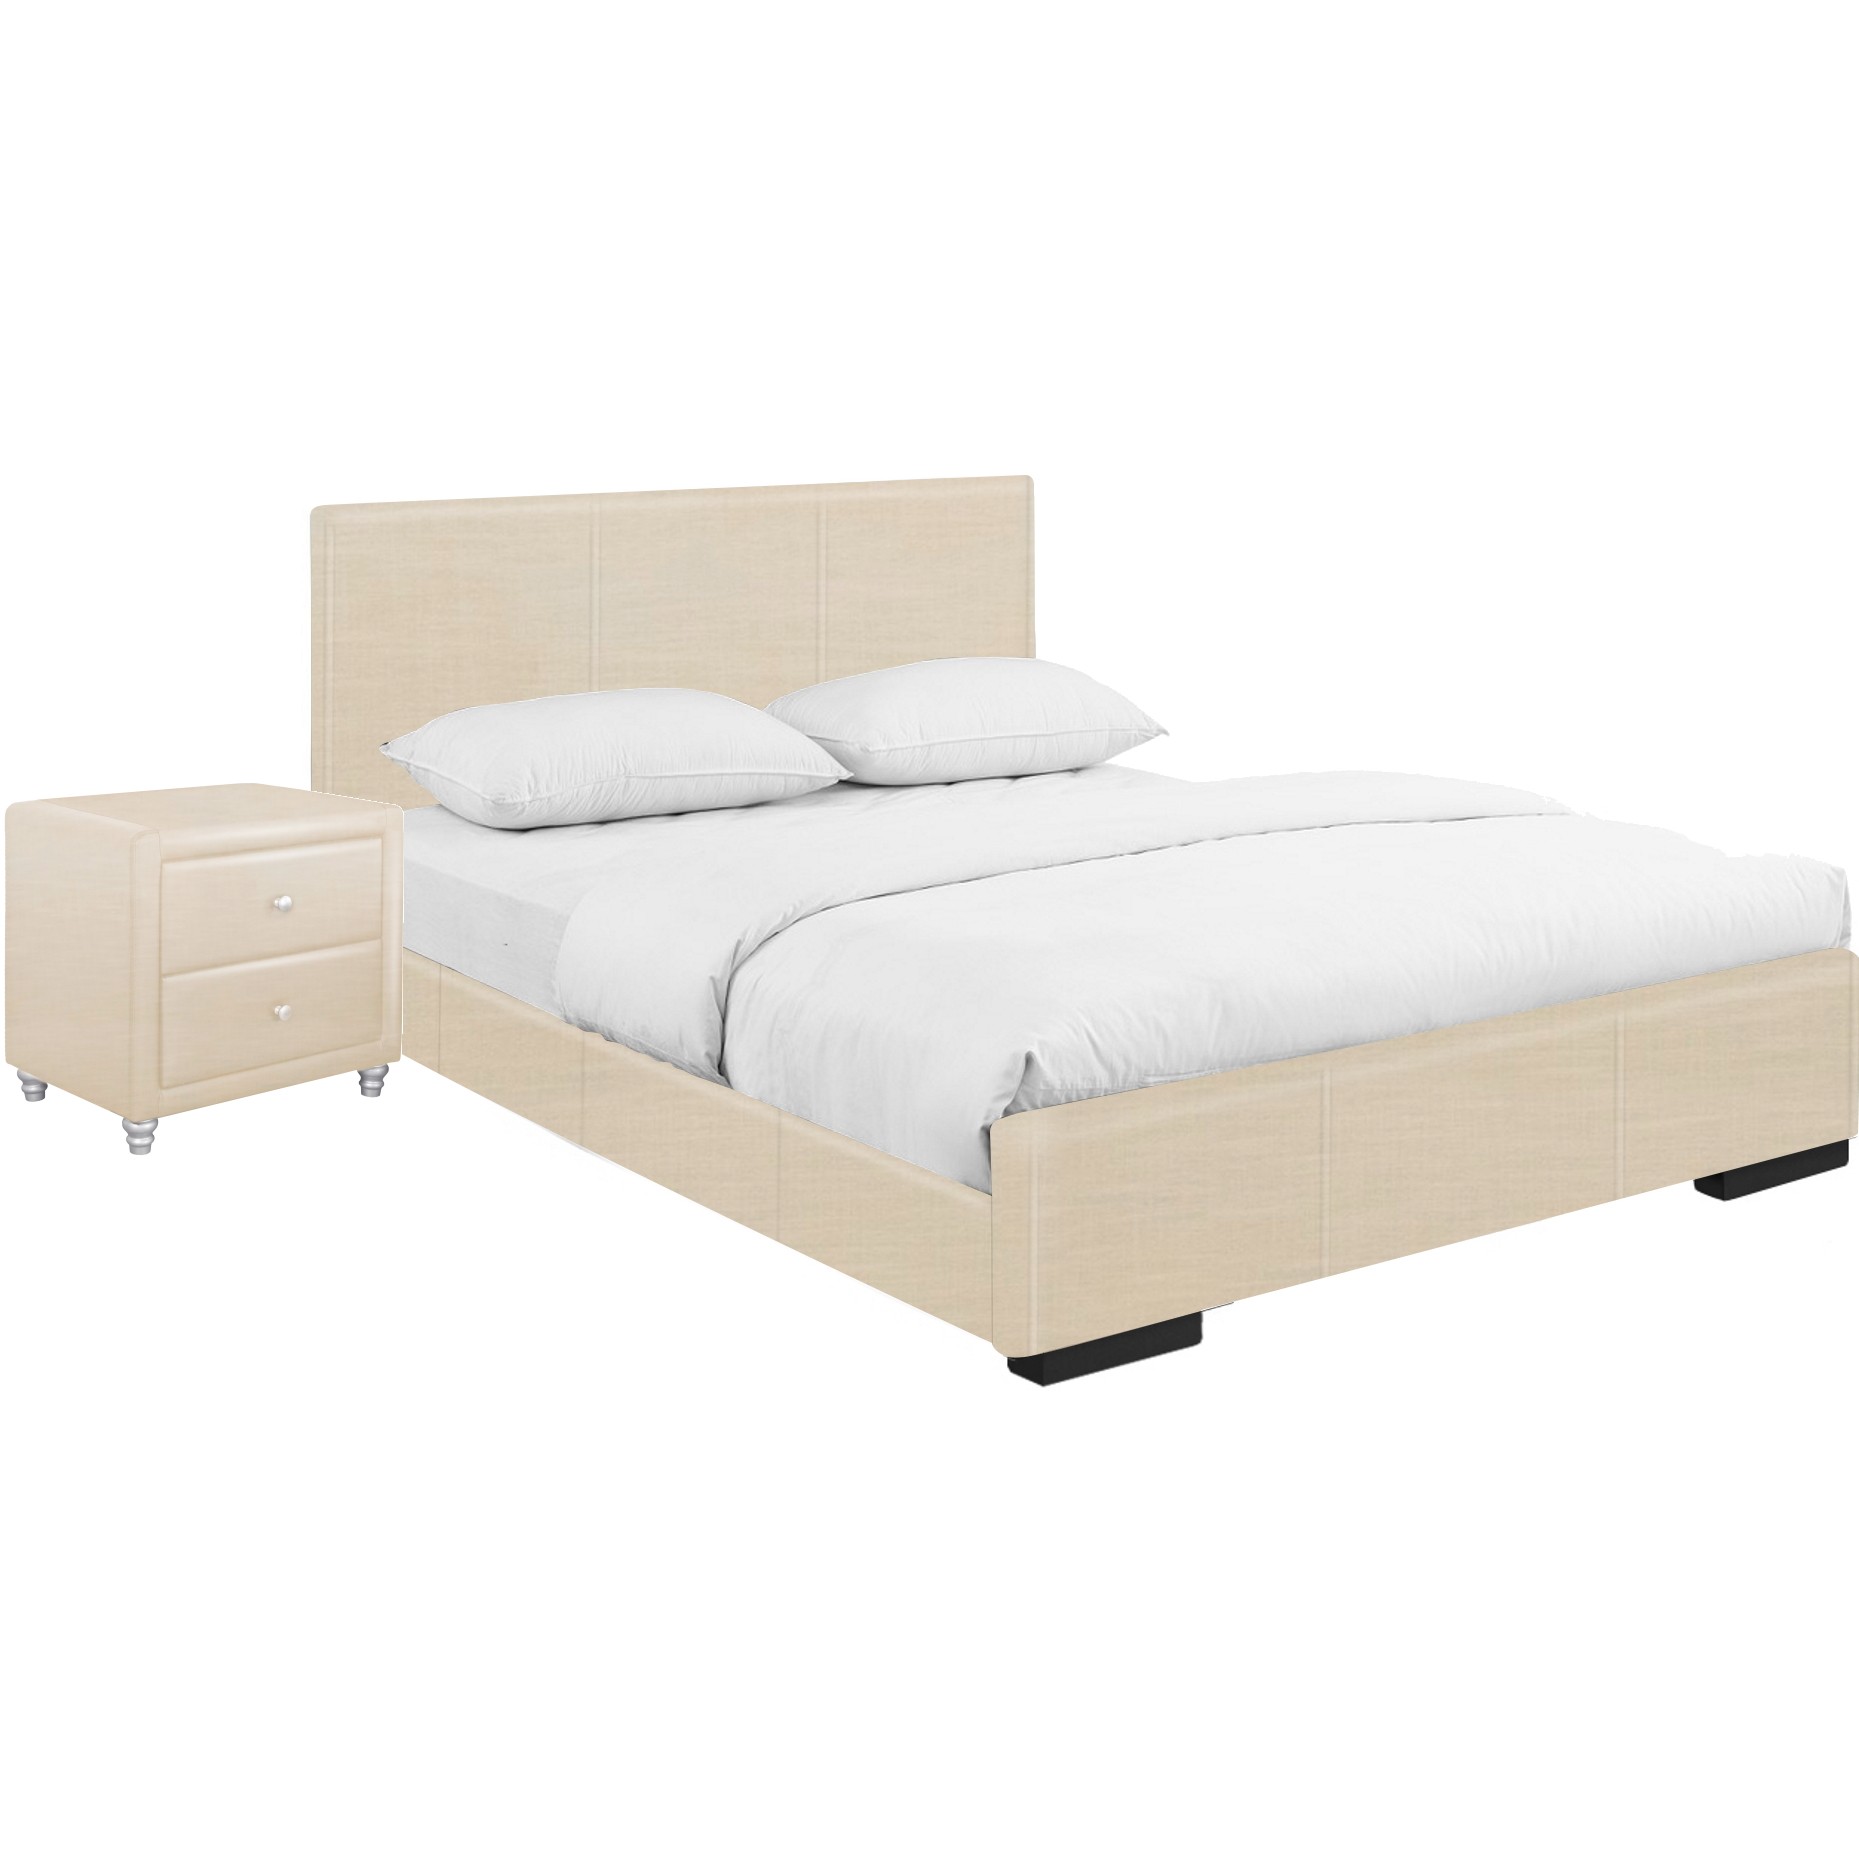 Solid Manufactured Wood Beige Standard Bed Upholstered With Headboard-397066-1